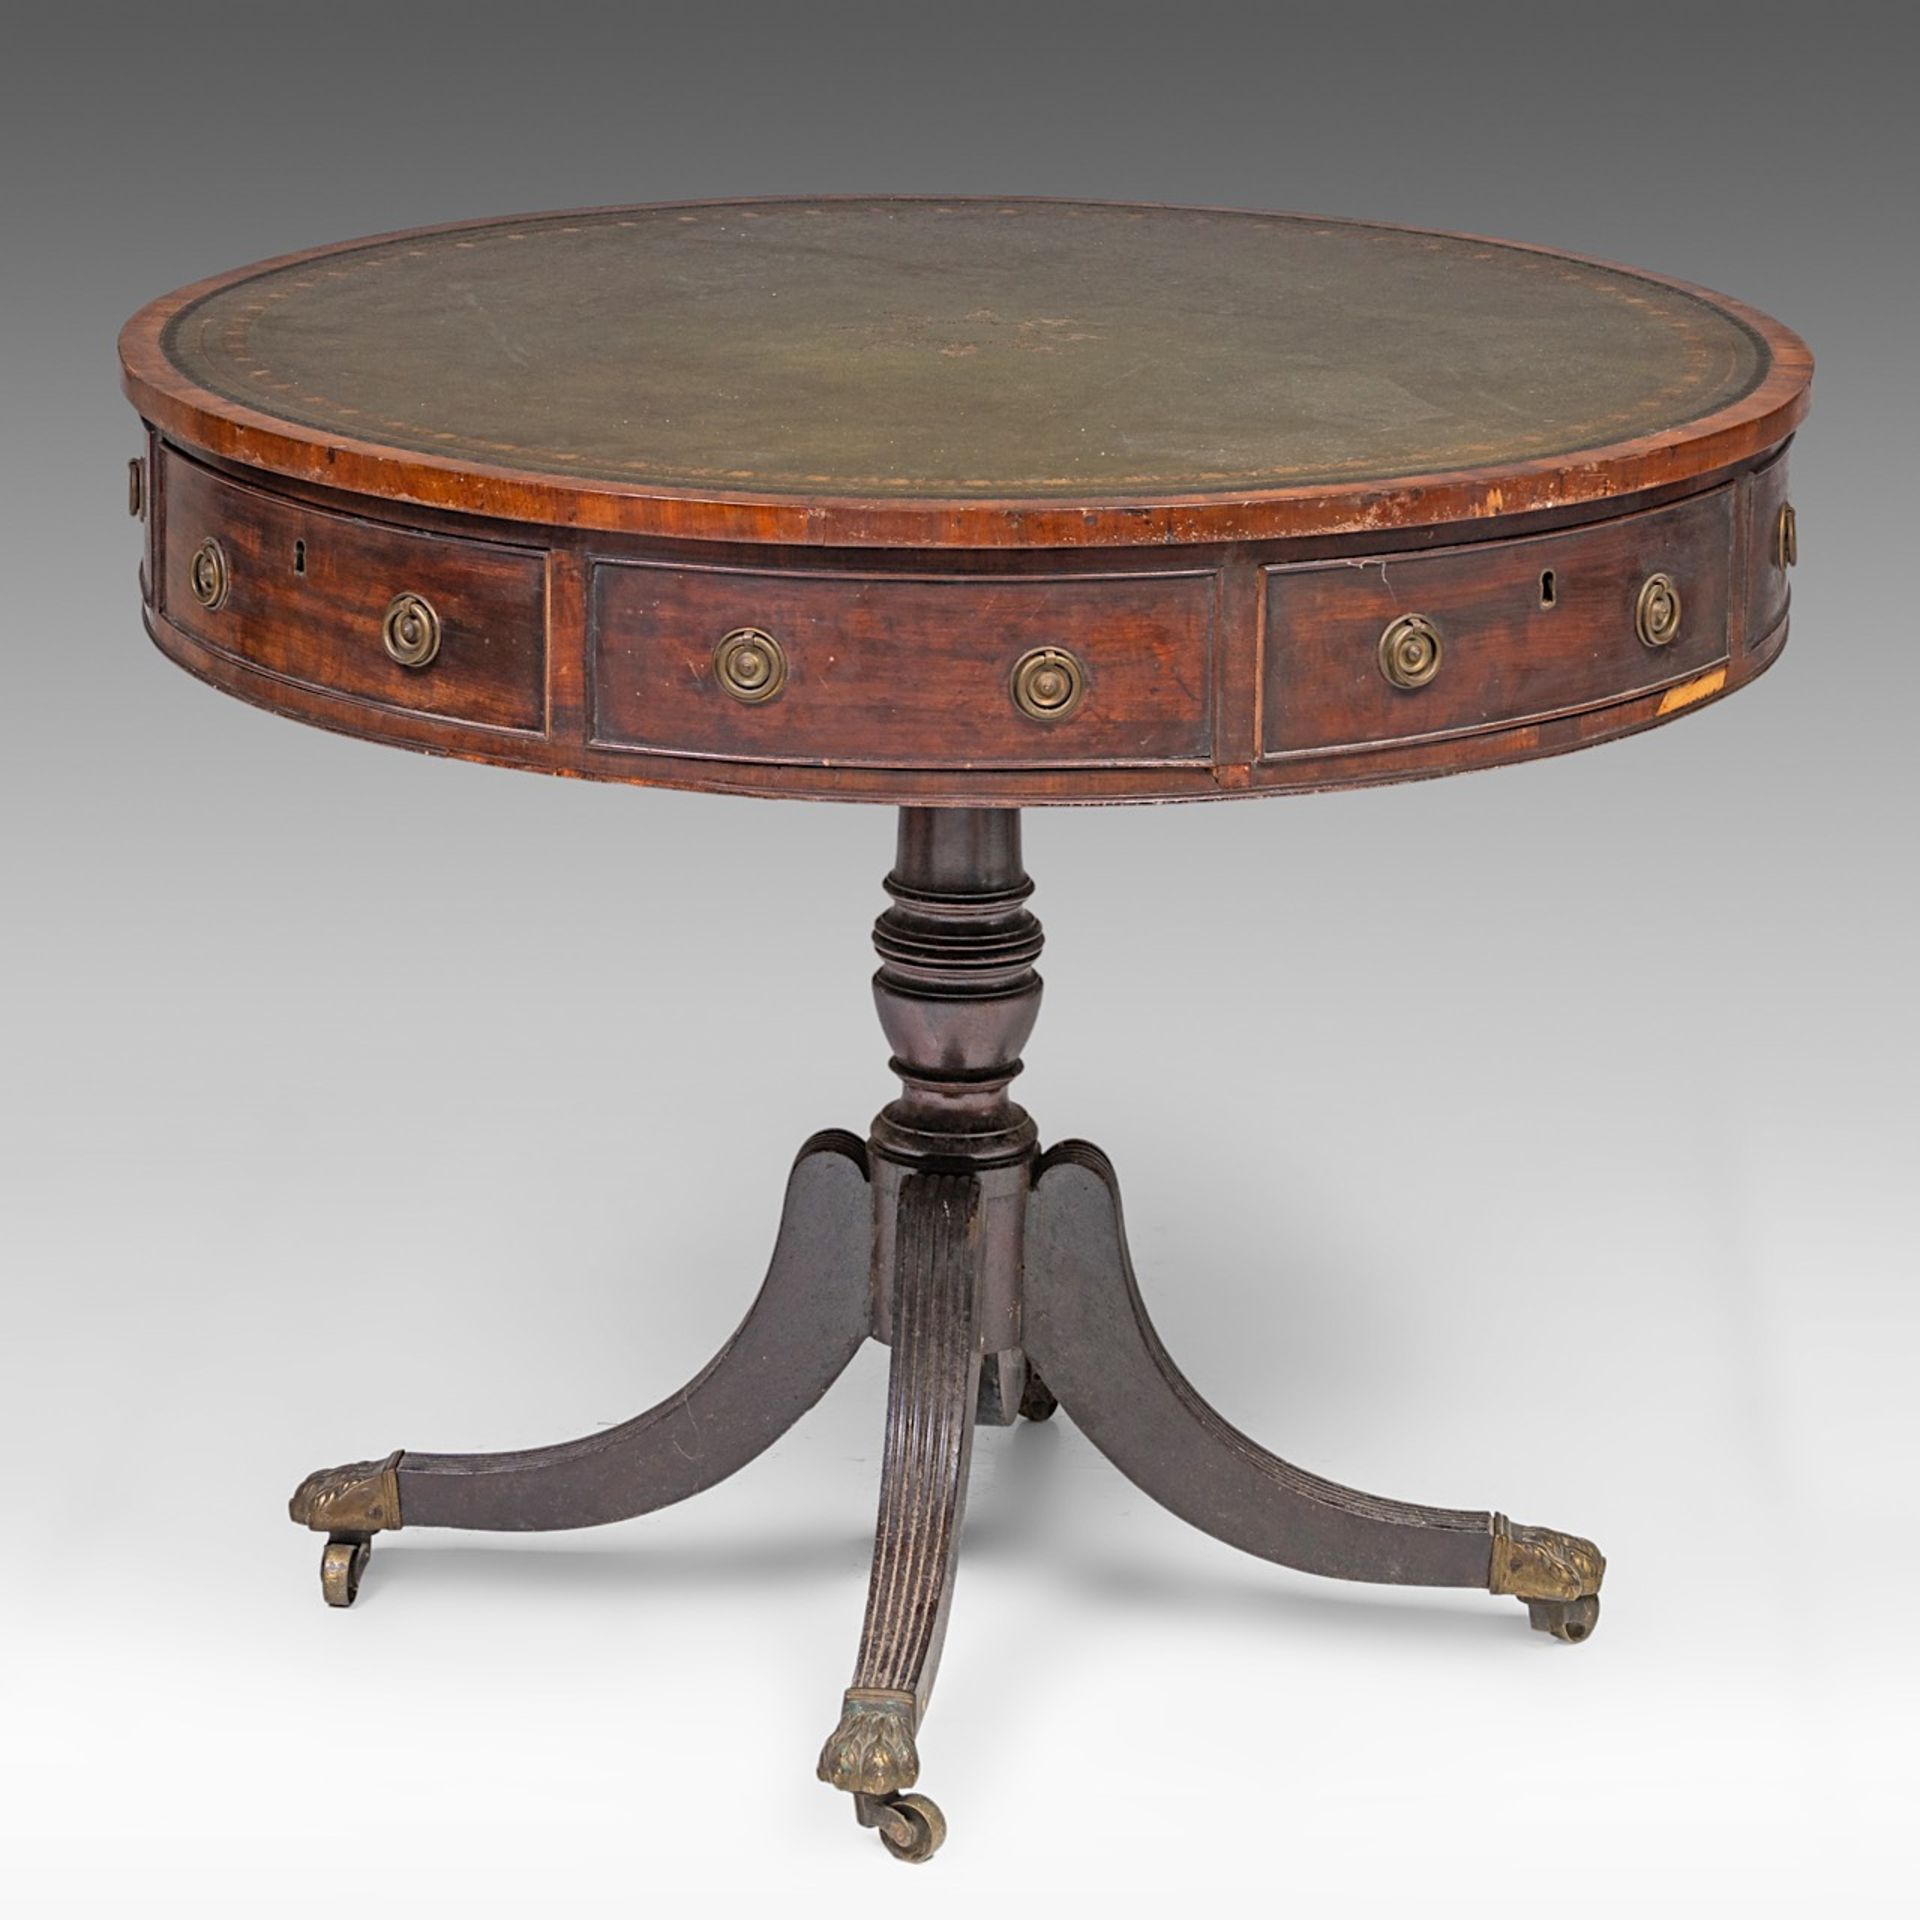 An English revolving drum table, marked with a crowned WR, ca. 1800, H 74 cm - dia 91 cm - Image 5 of 9